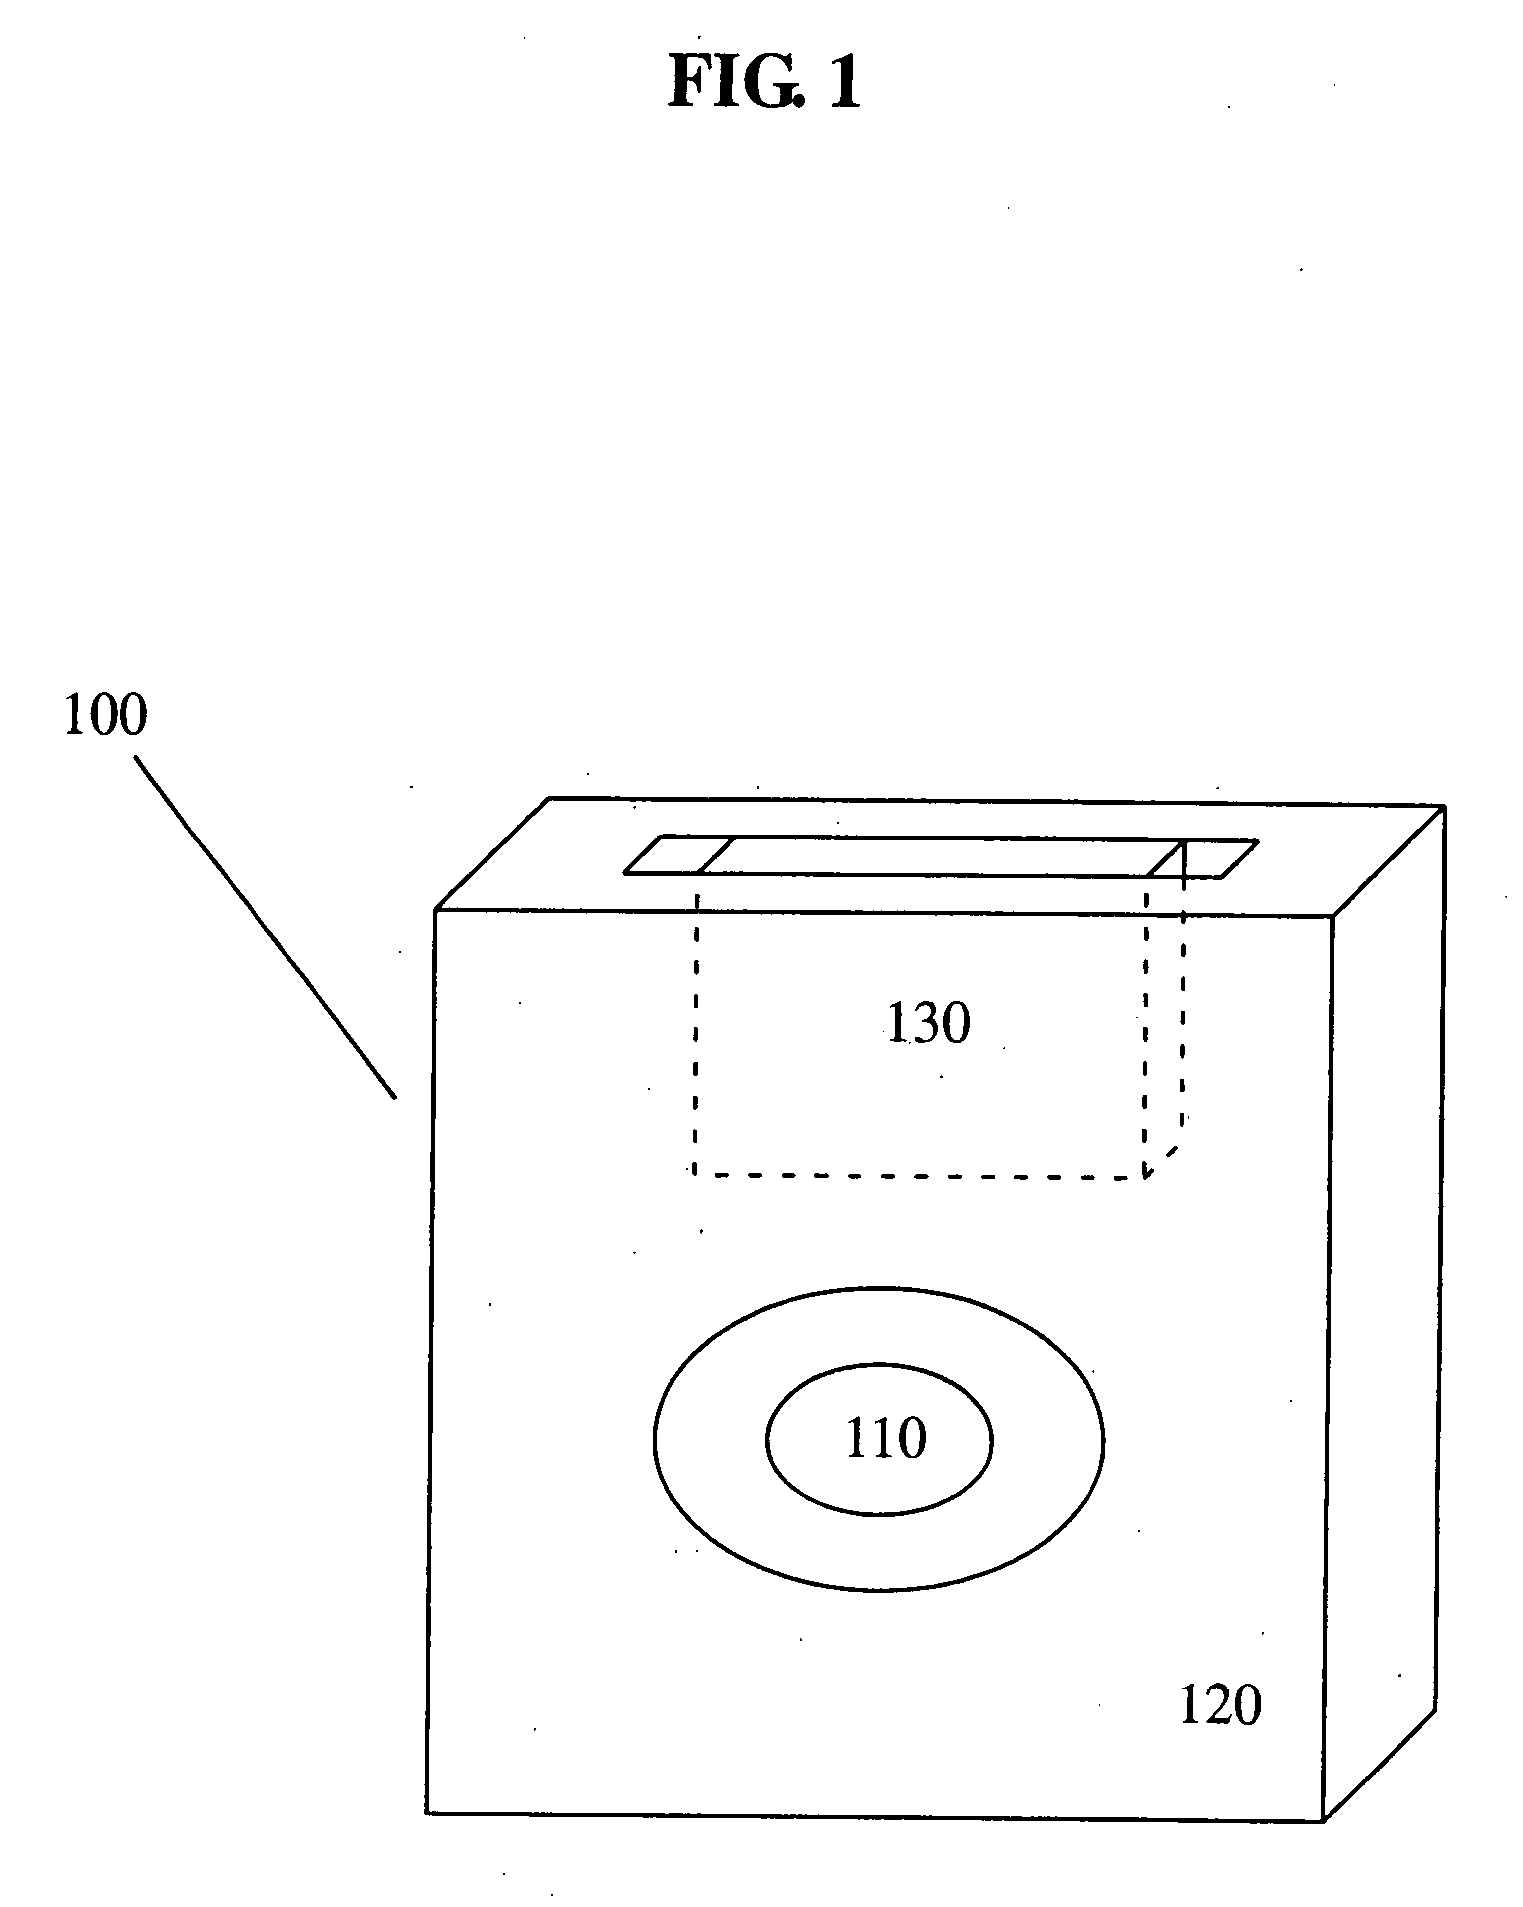 Portable electroretinograph with automated, flexible software